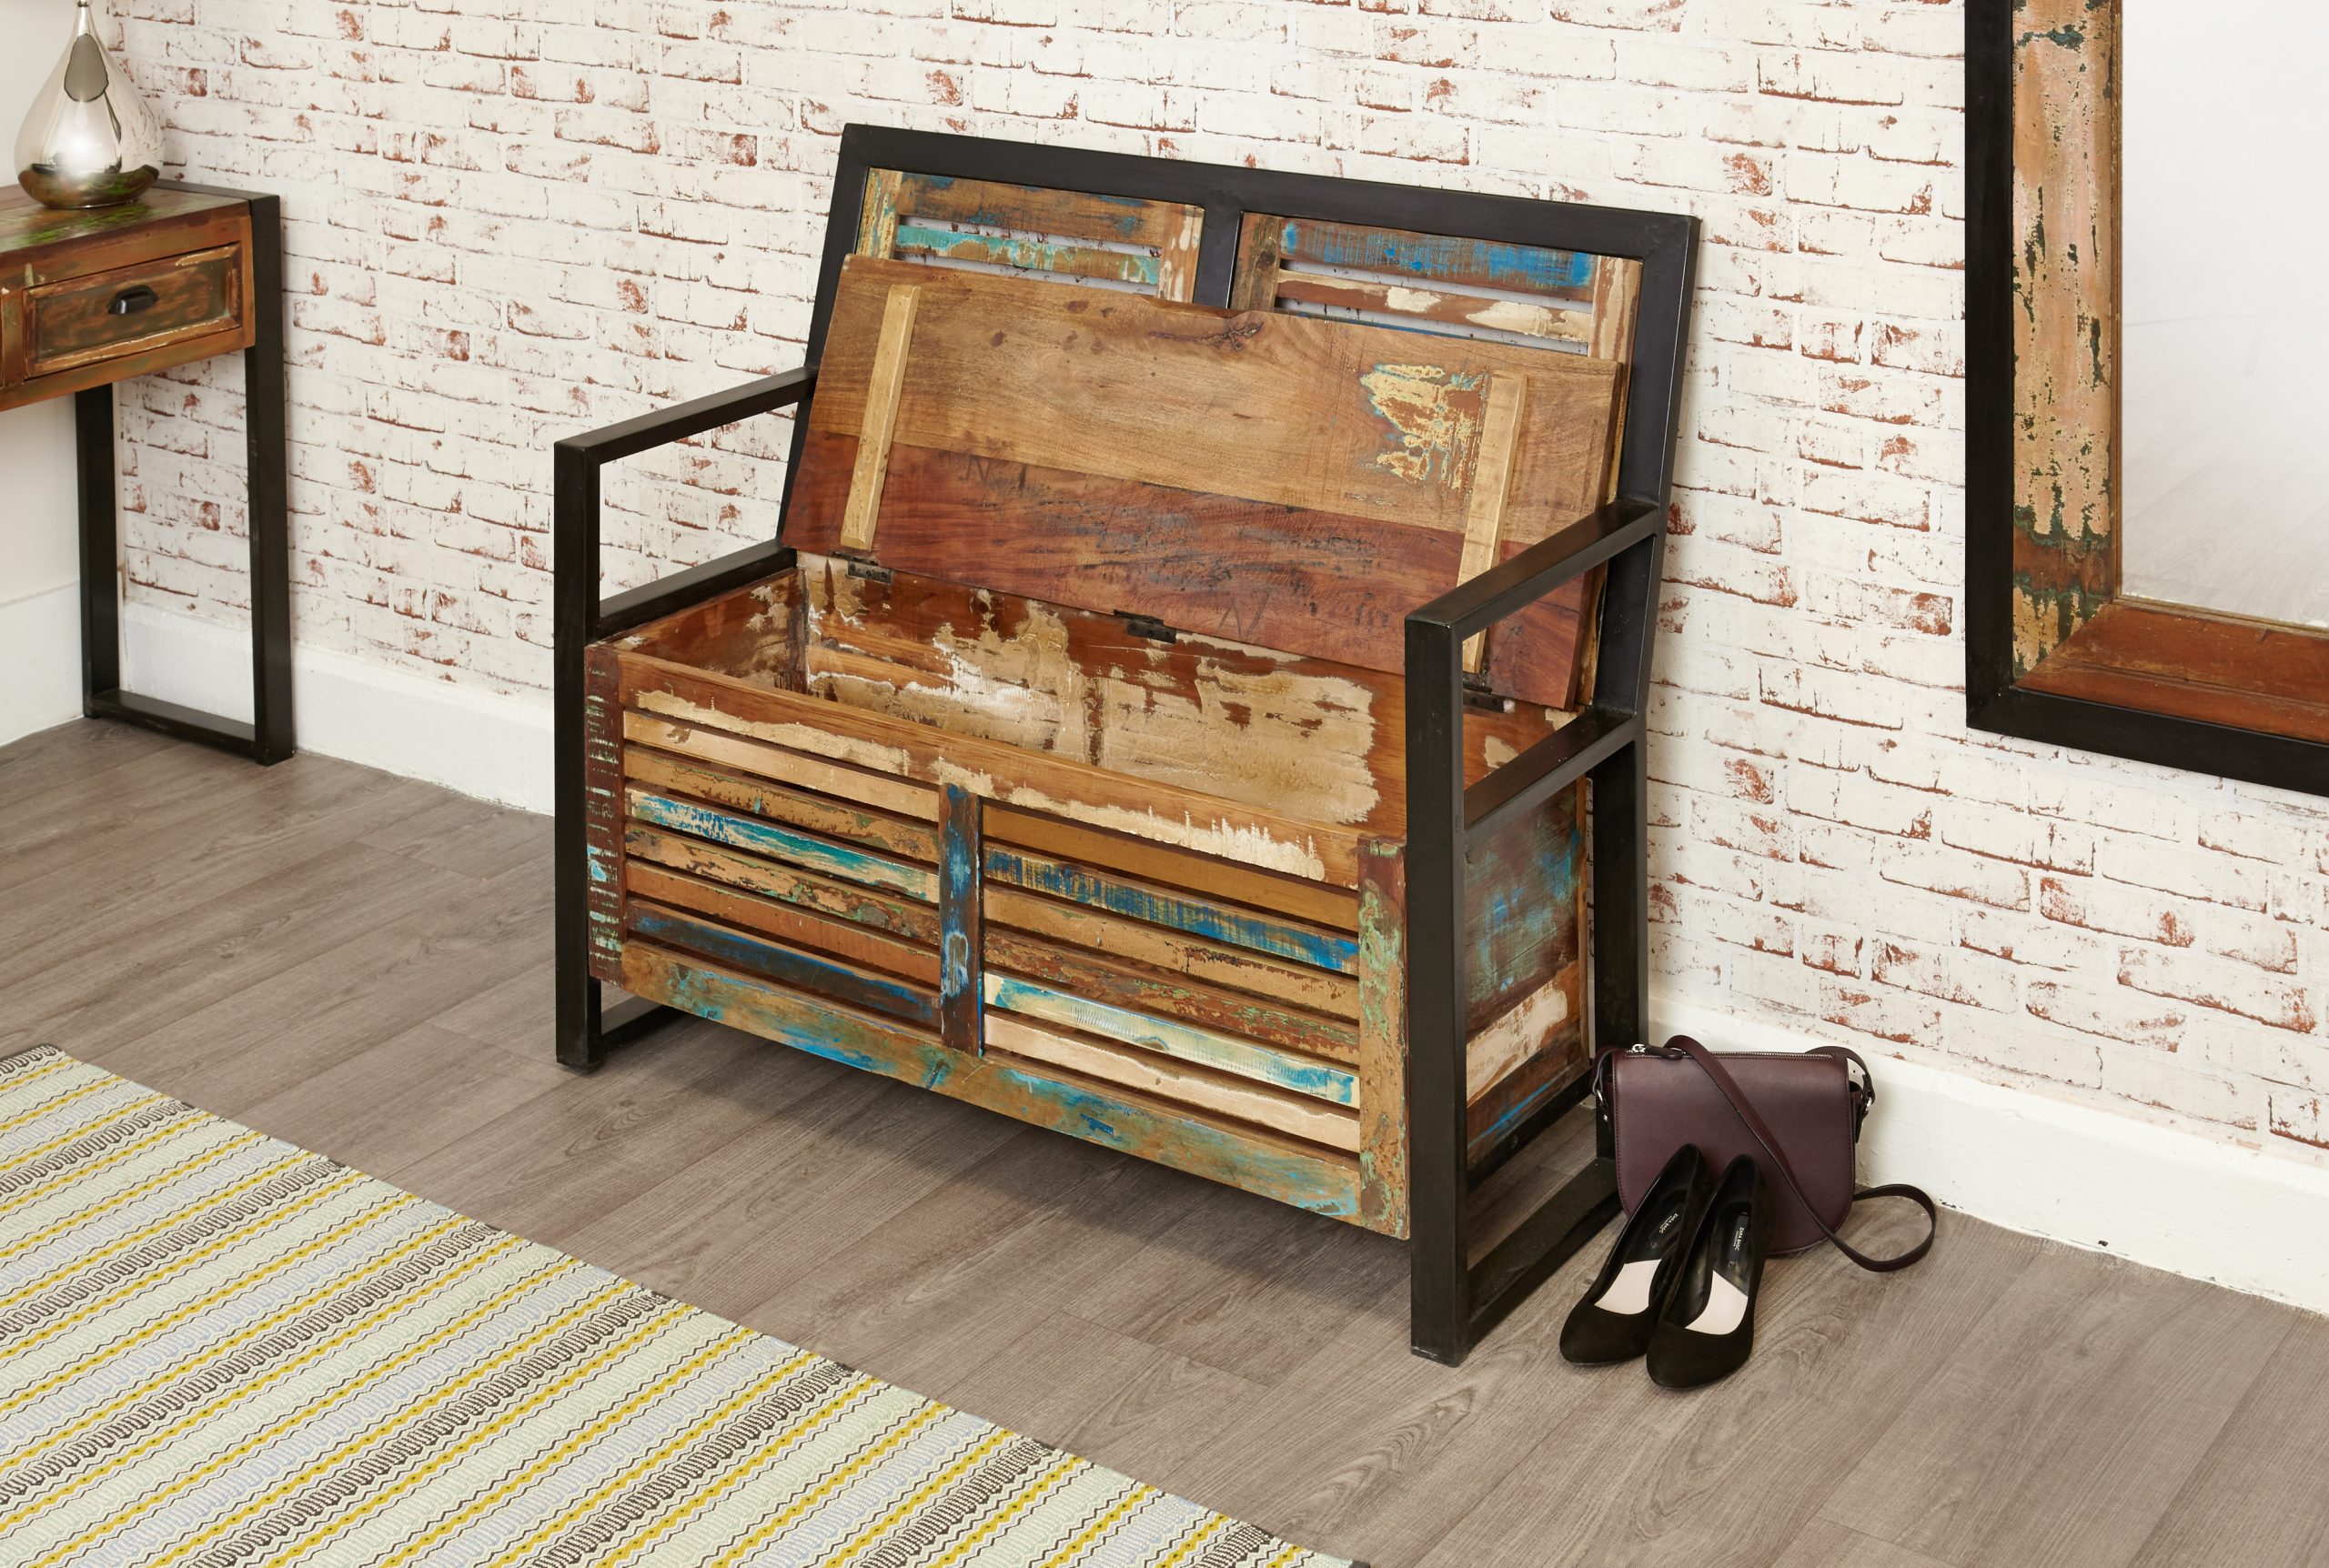 Monks bench with storage space